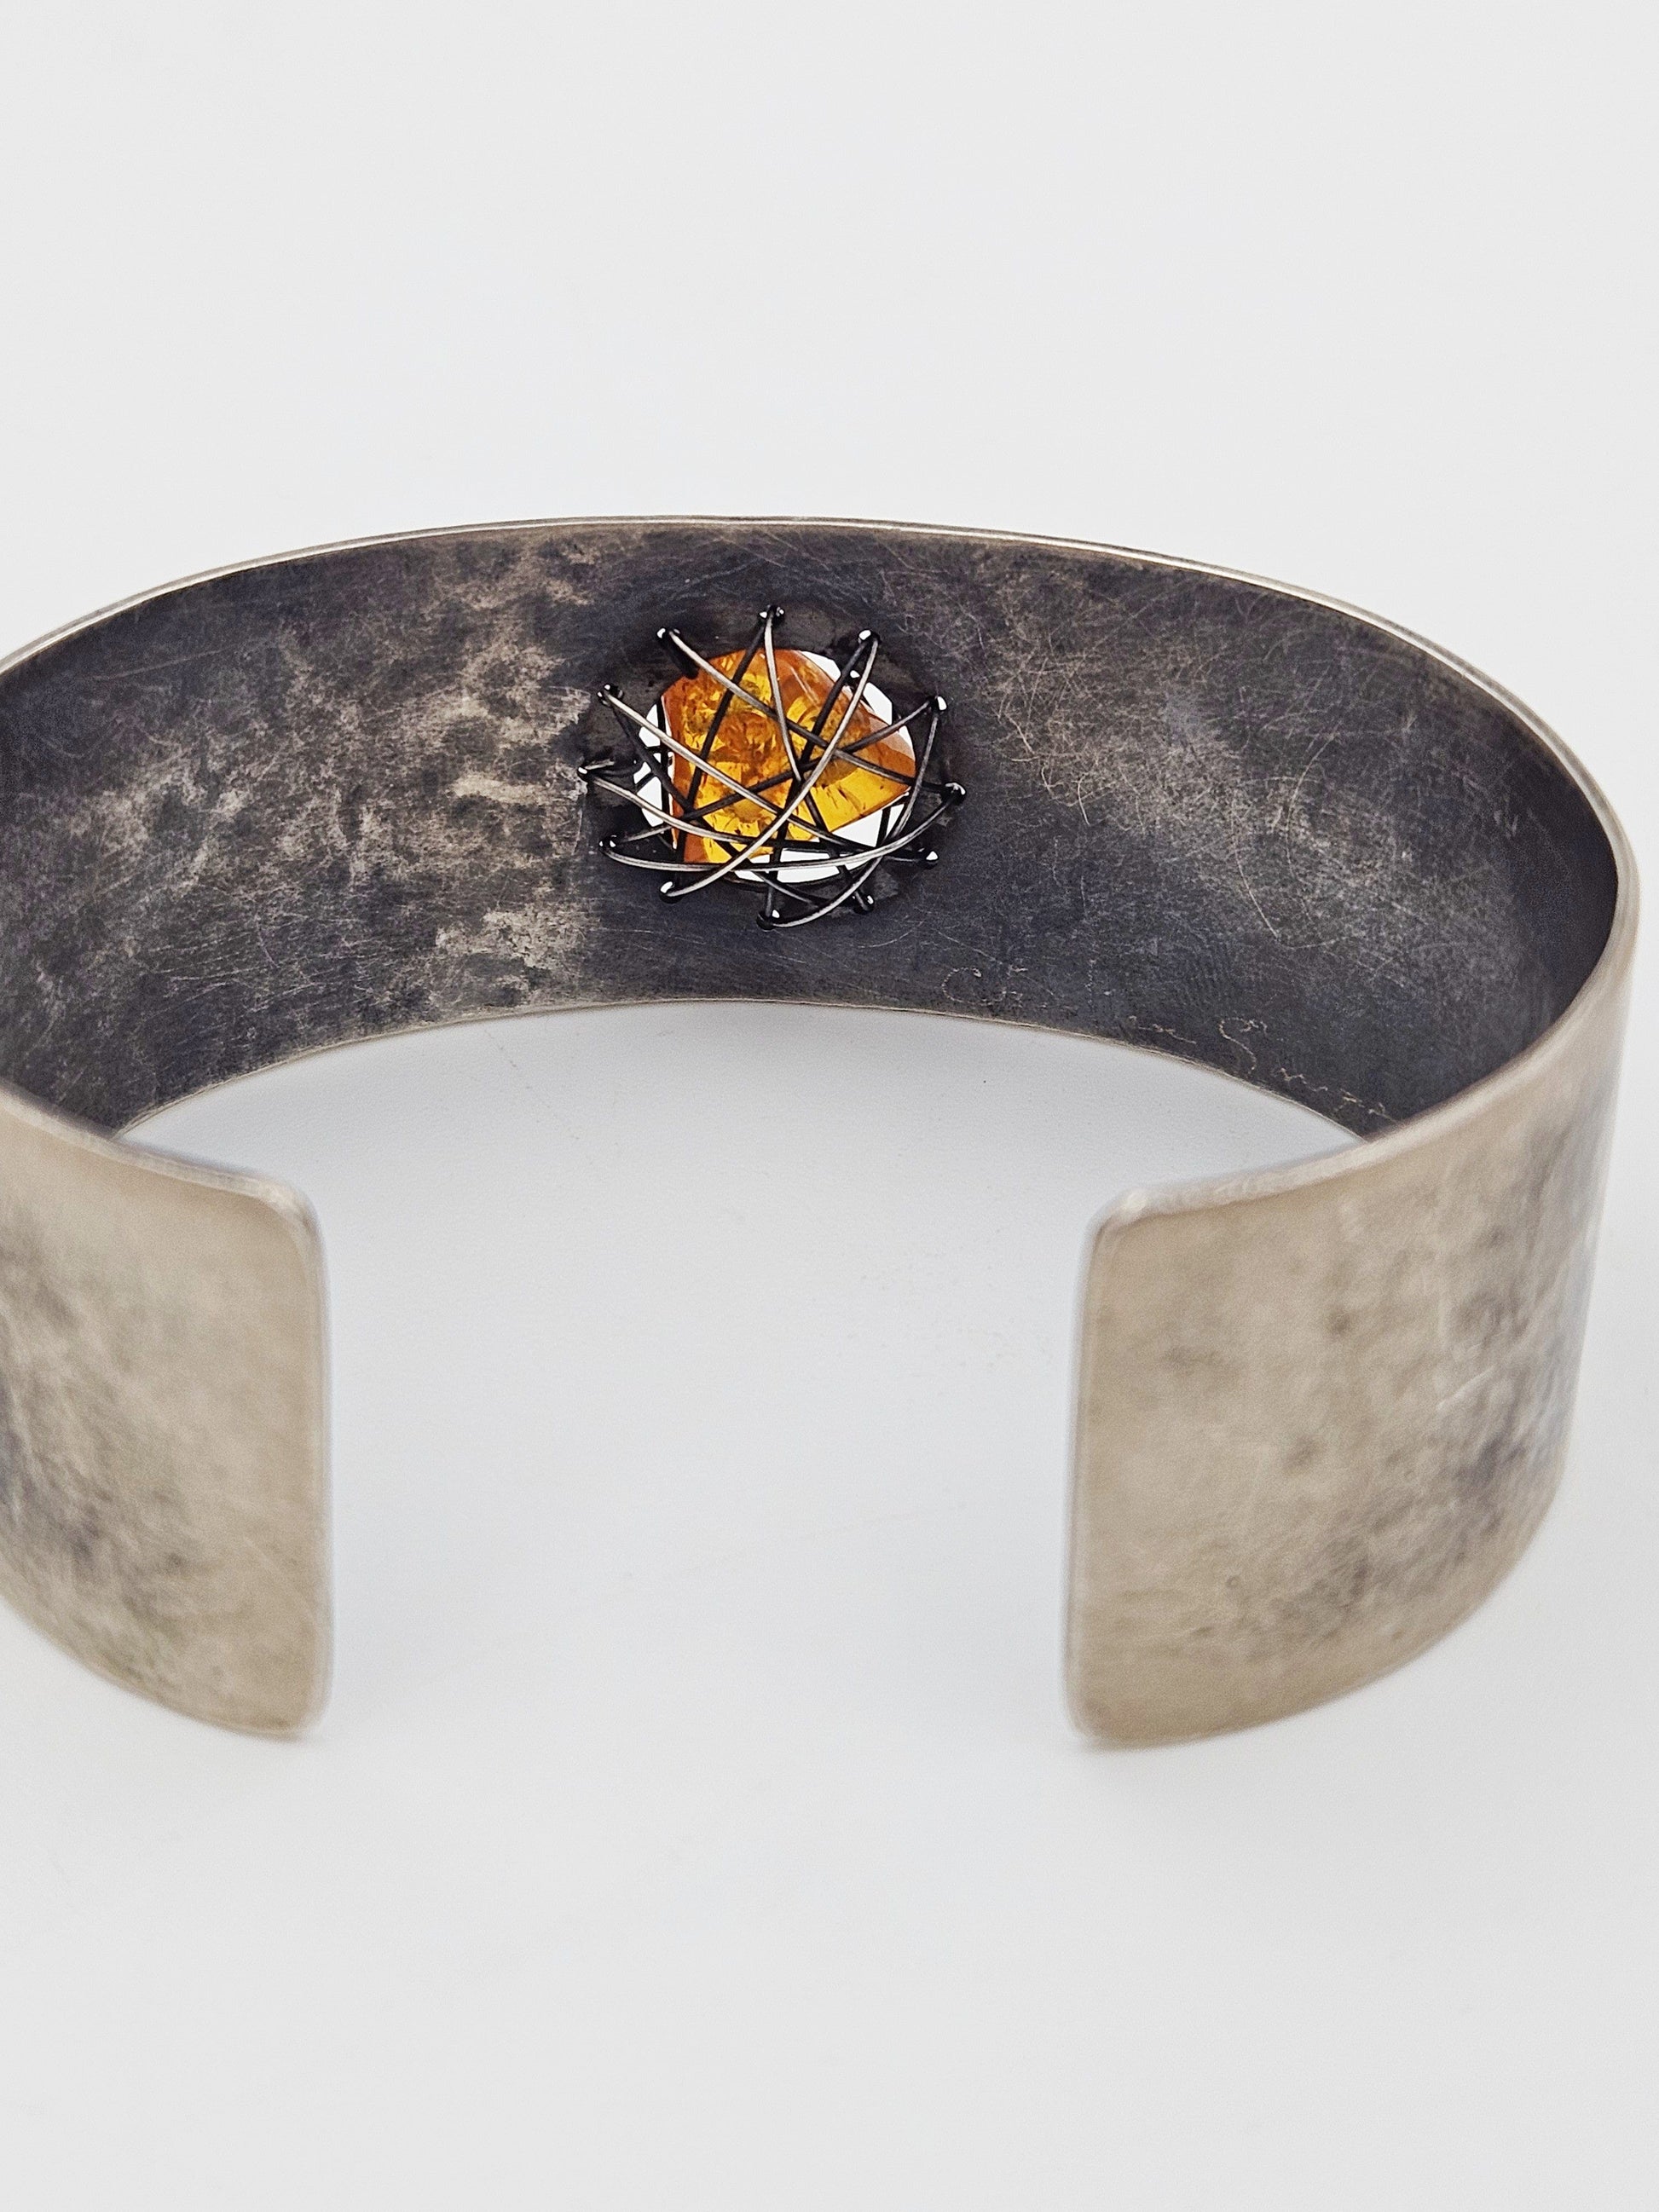 TMCMH Jewelry Sterling & Amber Artisan Signed Modernist Cuff Bracelet